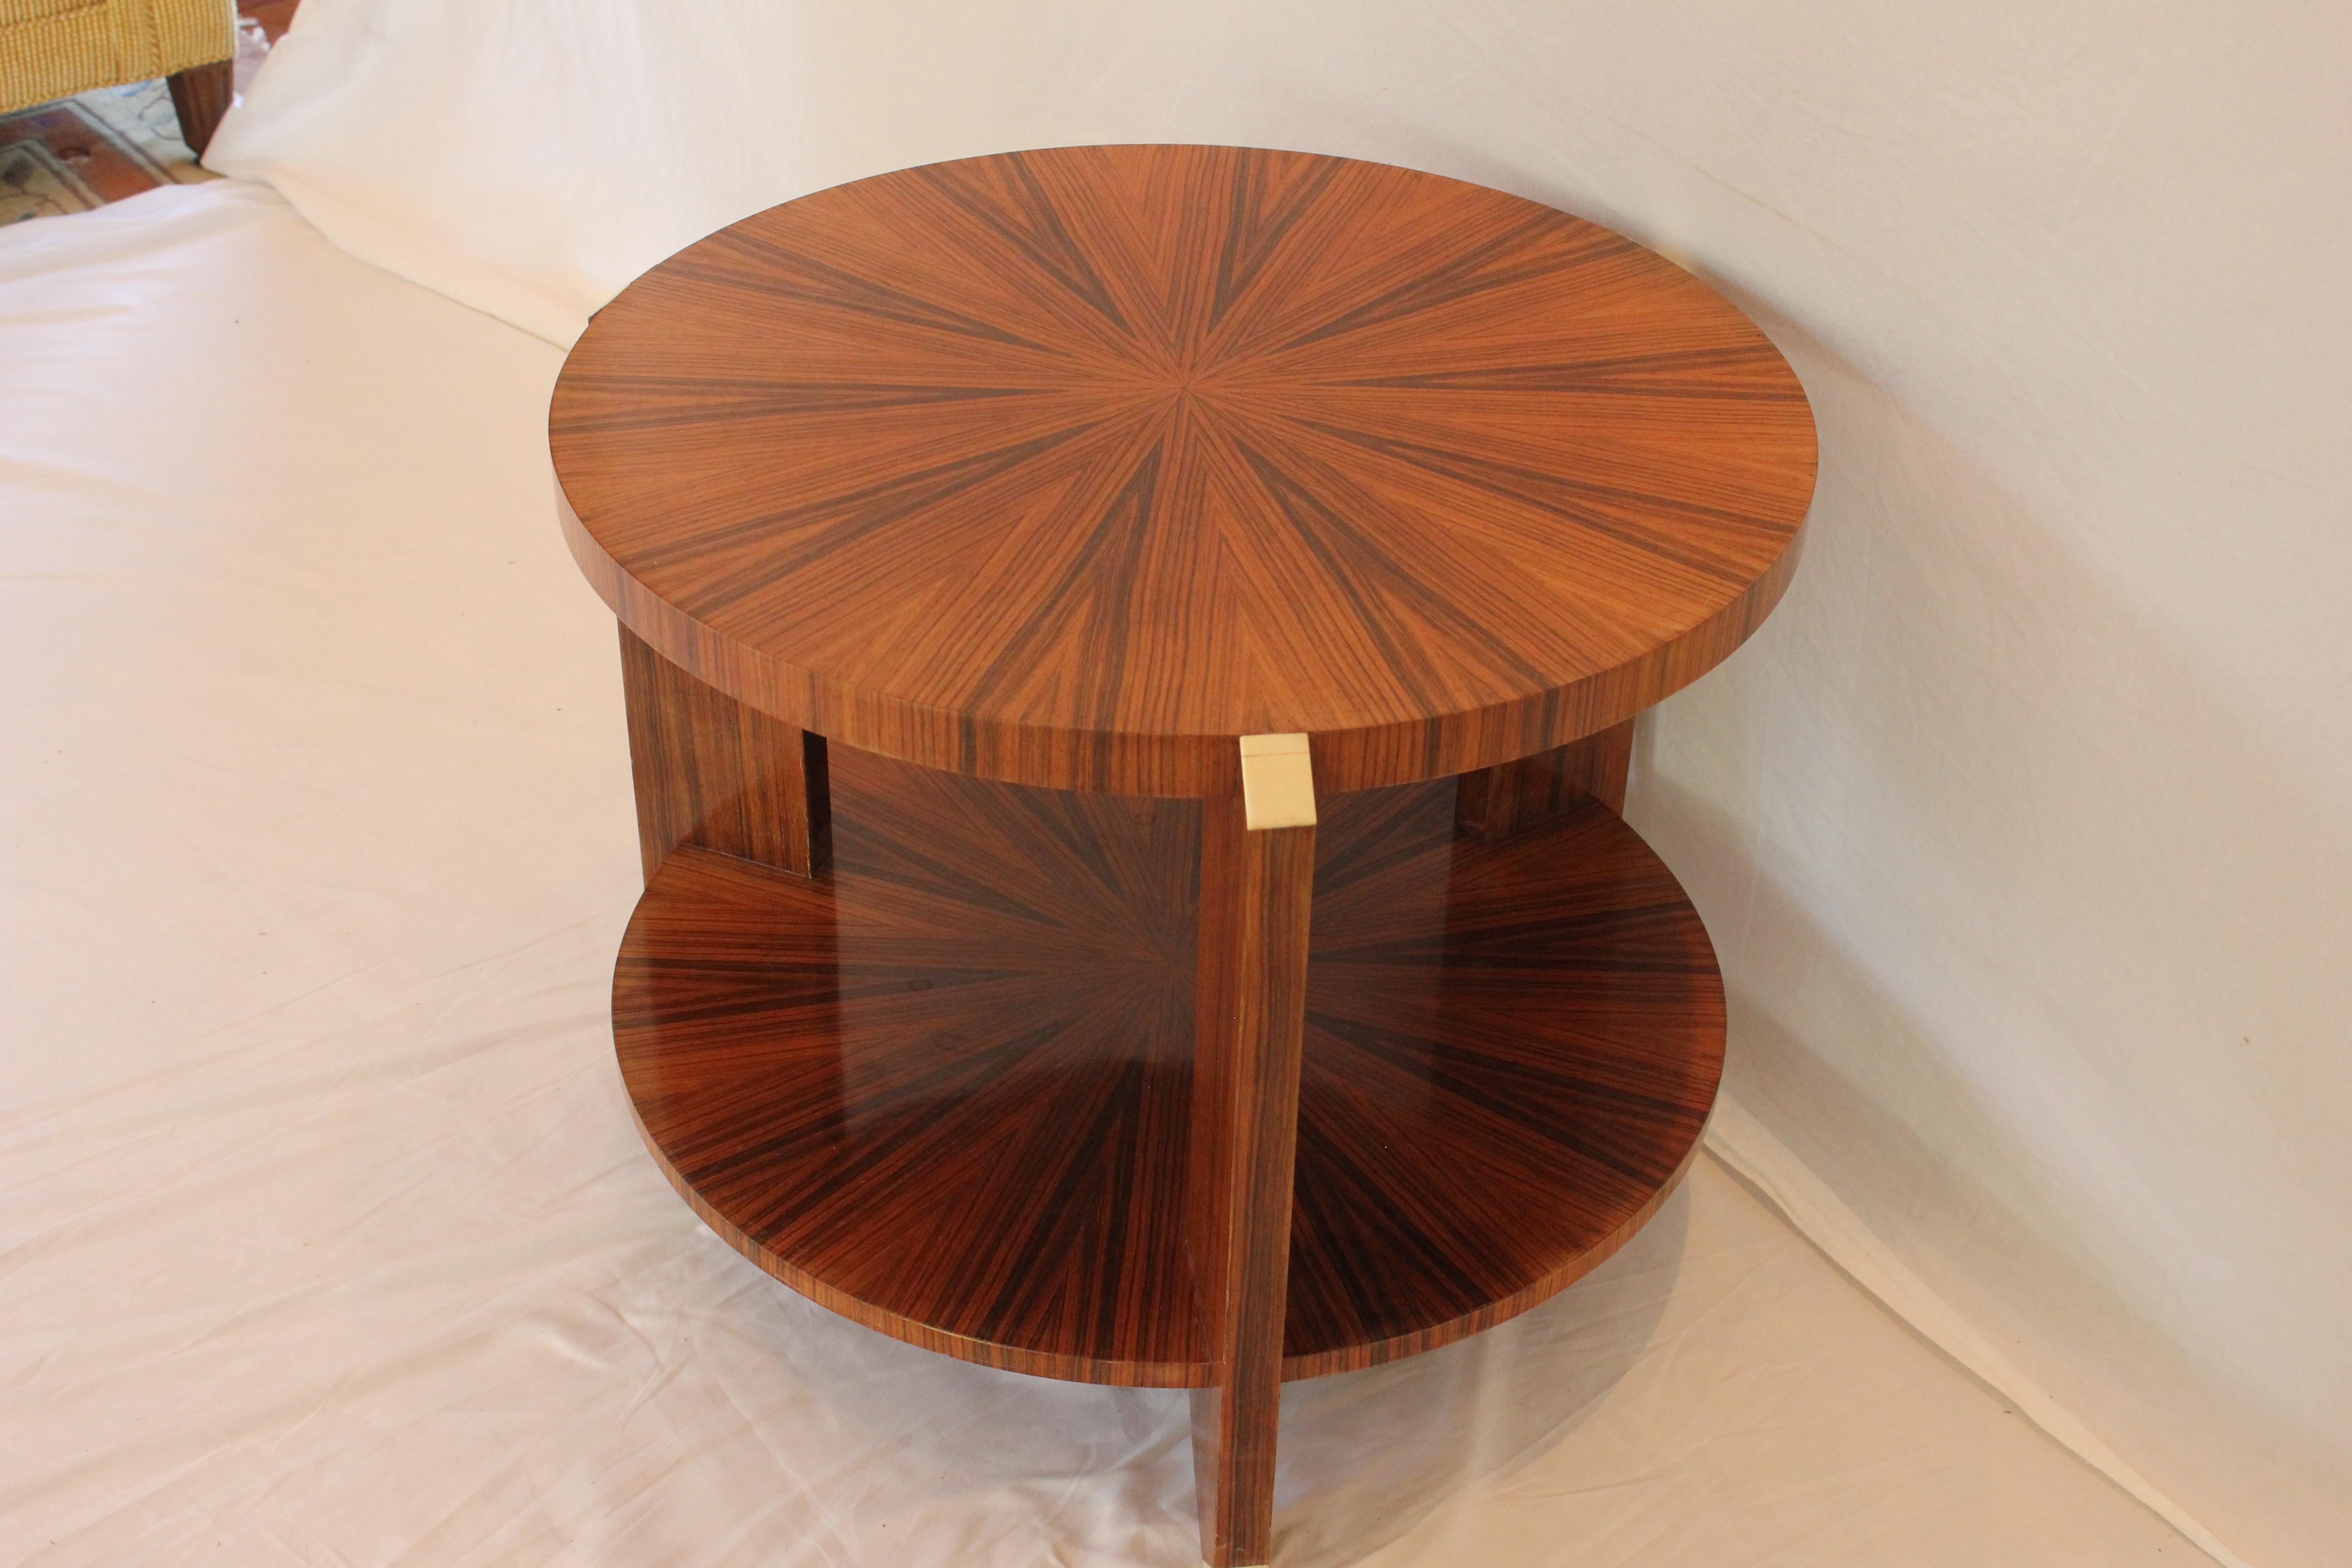 Beautifully executed French Art Deco C. 1930's side table with highly figured radial starburst design crafted from highly figured walnut veneer. In the style of Émile-Jacques Ruhlmann. Very good - excellent condition.